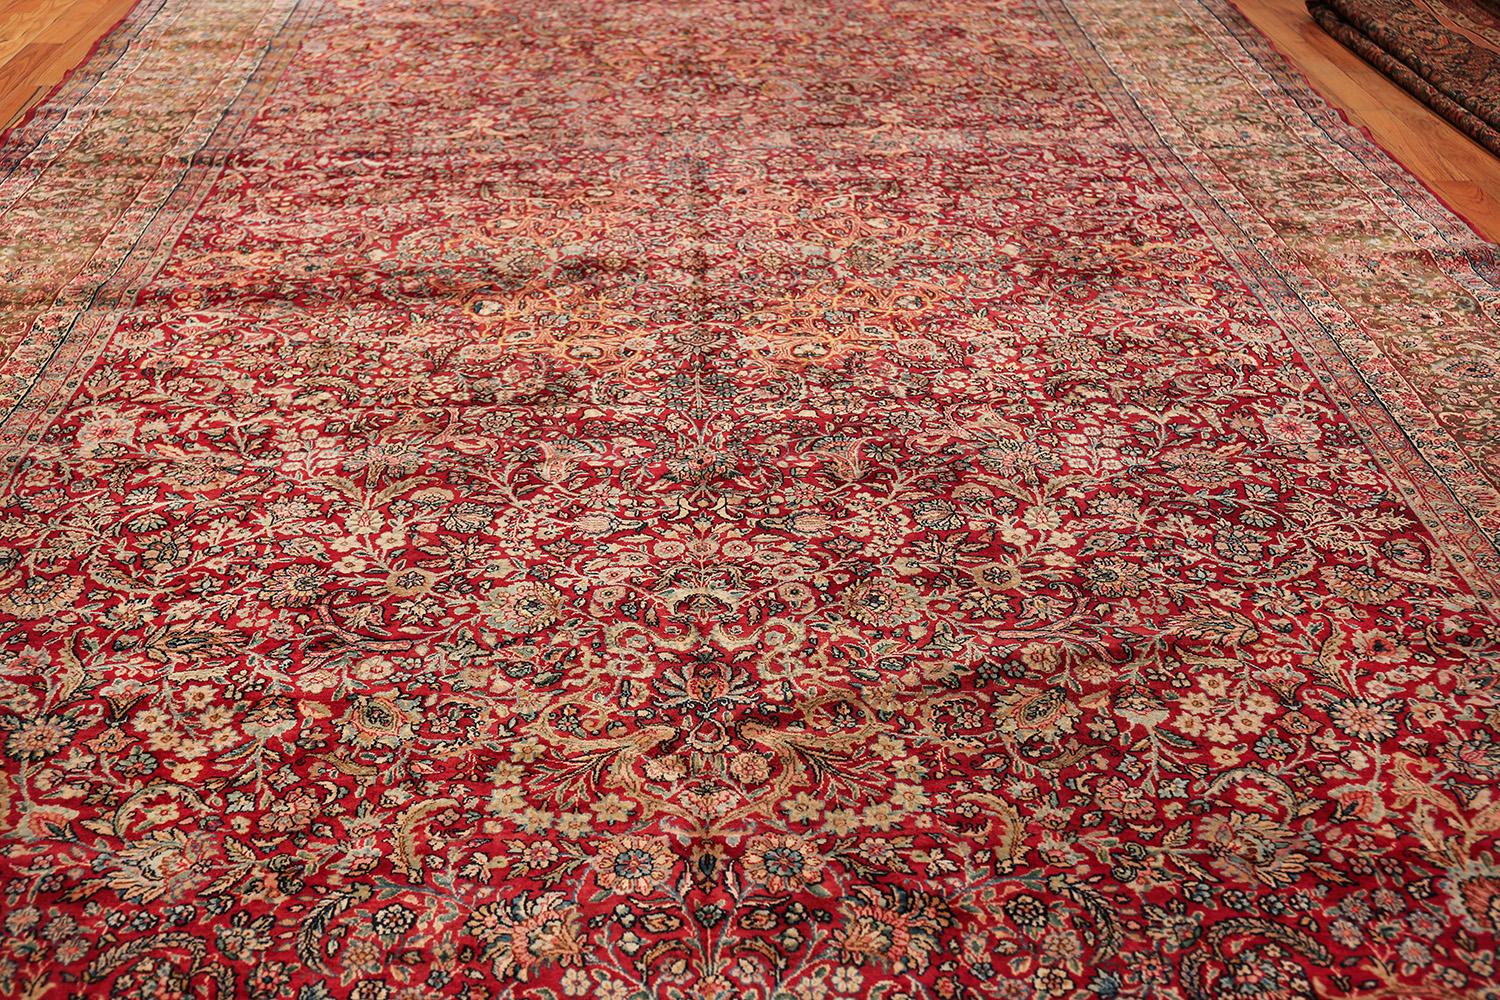 Antique Kerman Persian Rug. Size: 9 ft 9 in x 17 ft 3 in (2.97 m x 5.26 m) 4